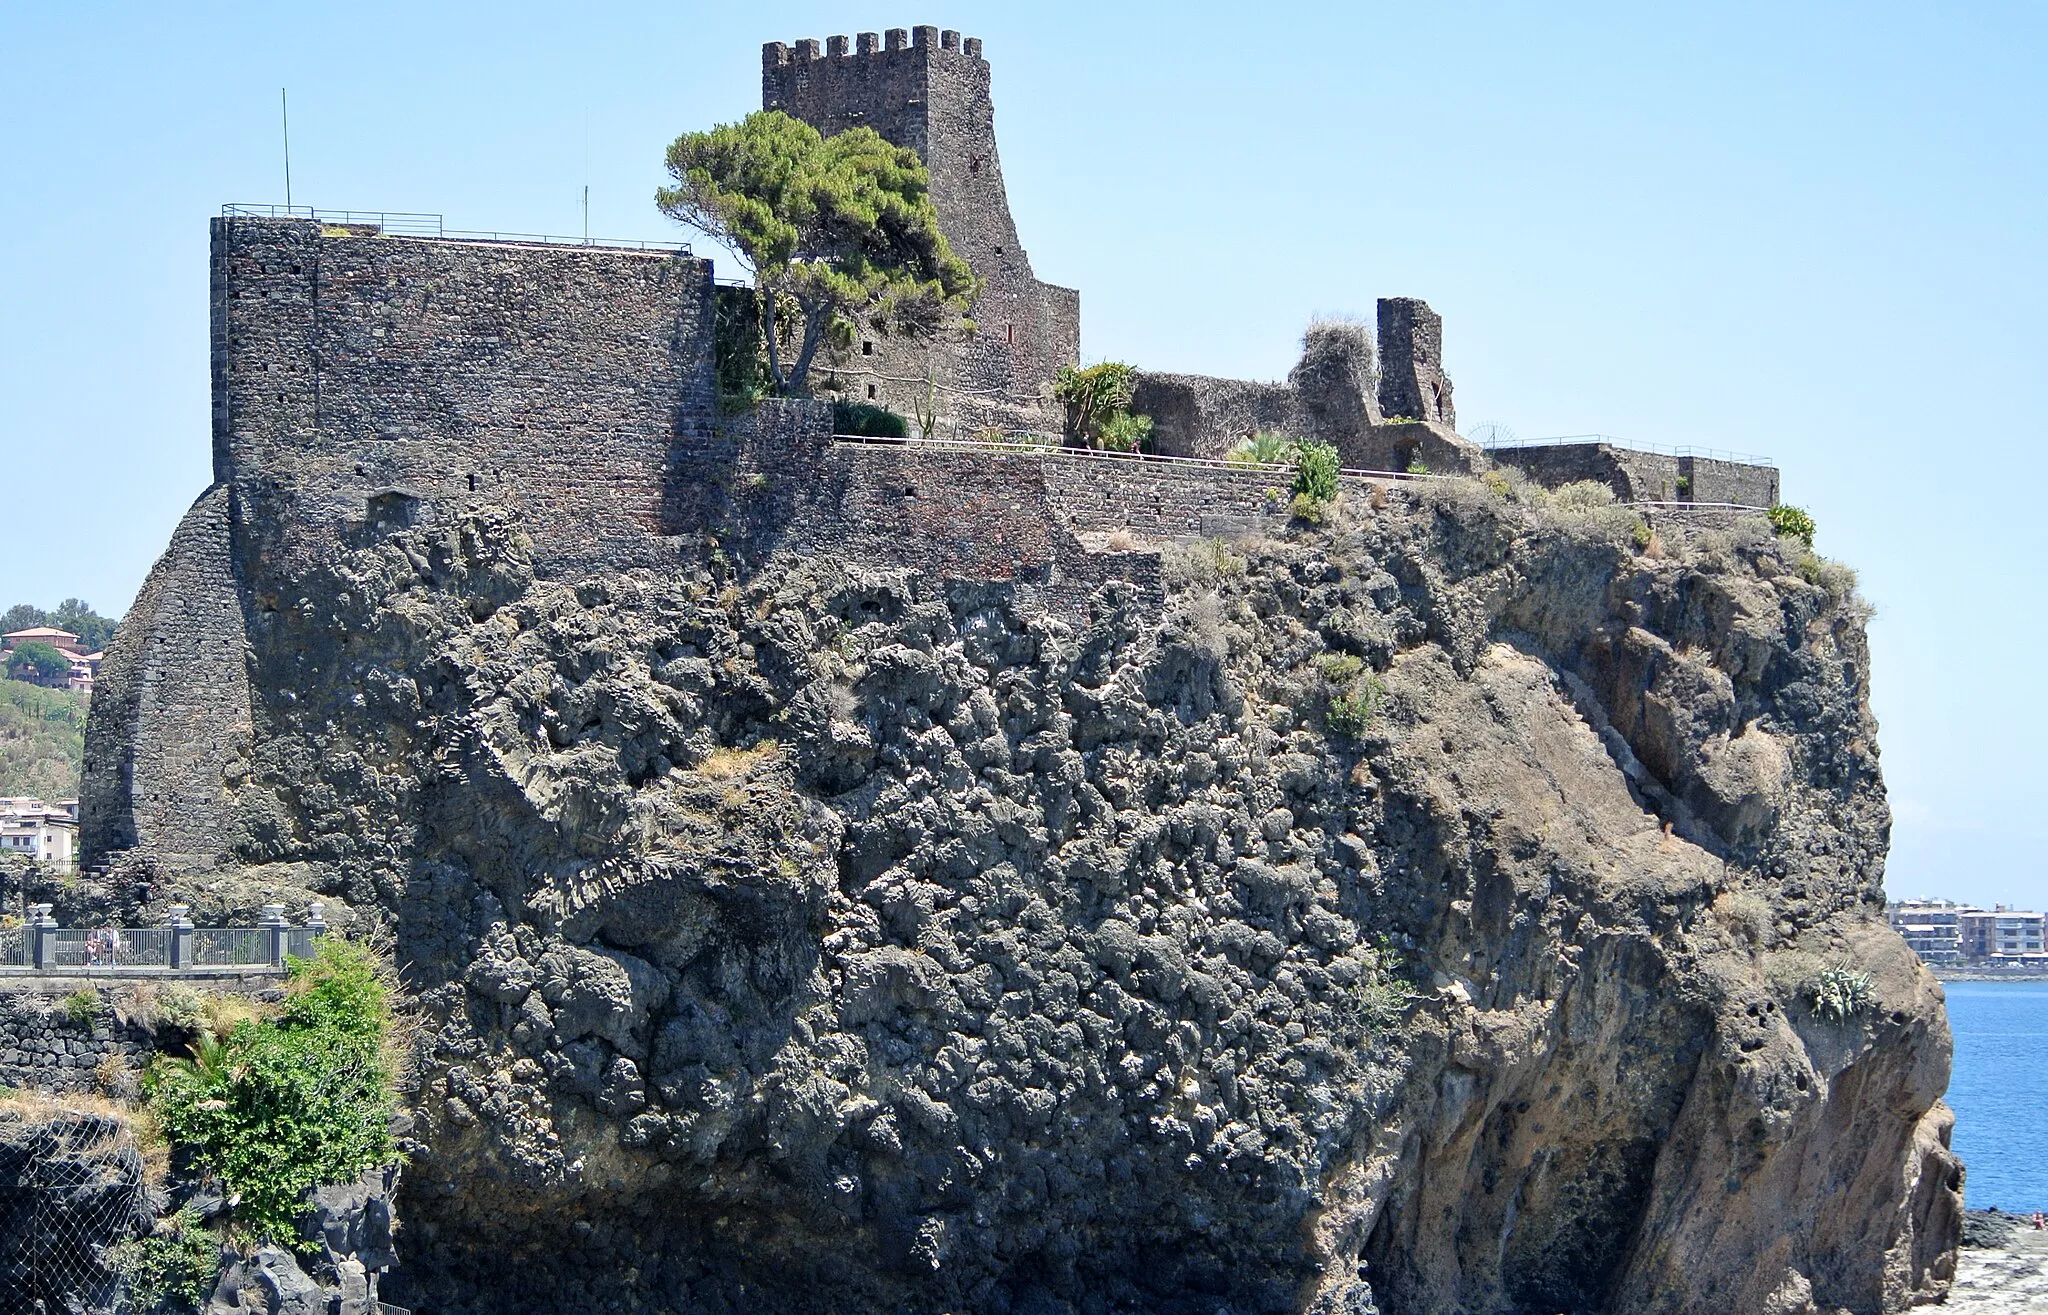 Photo showing: Norman castle at Aci Castello, Sicily, Italy.